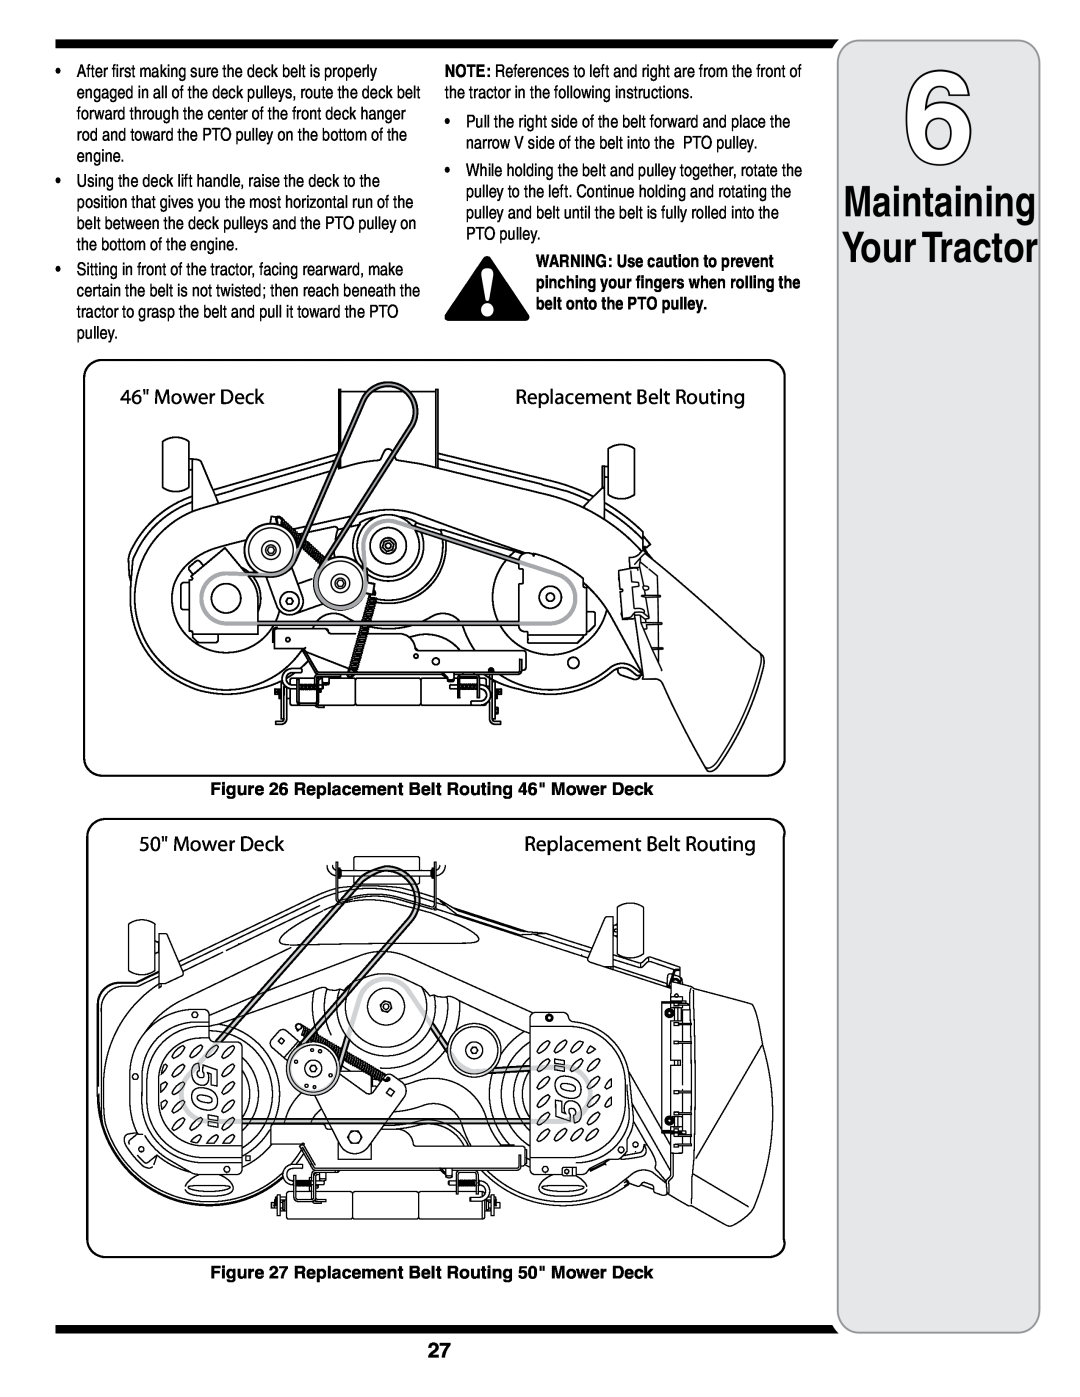 MTD i1046, i1050 warranty Replacement Belt Routing 46 Mower Deck, Replacement Belt Routing 50 Mower Deck 